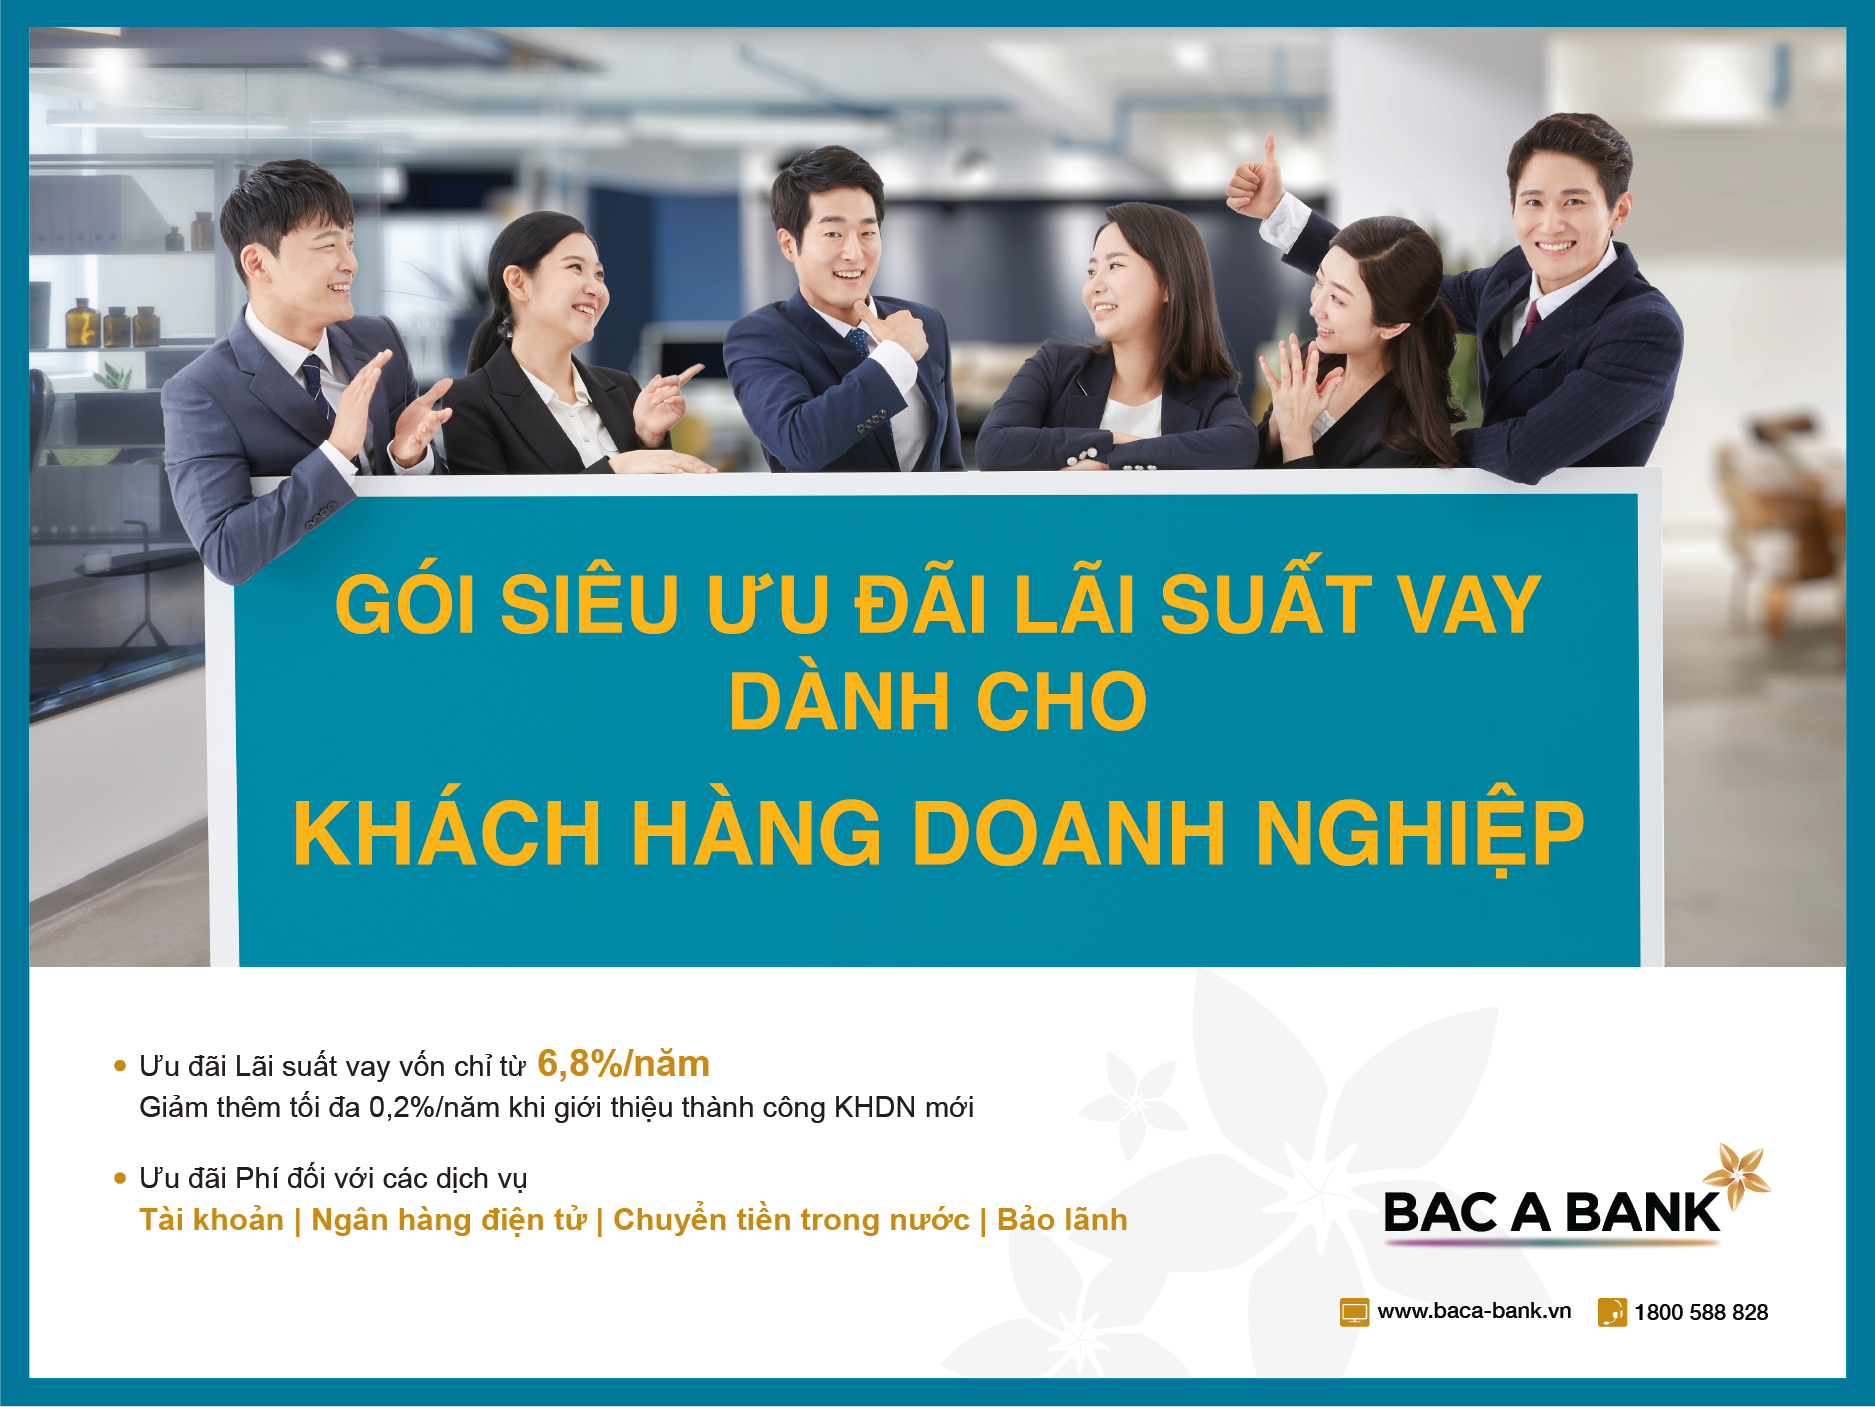 Enterprises to enjoy preferential rates with loans from BAC A BANK